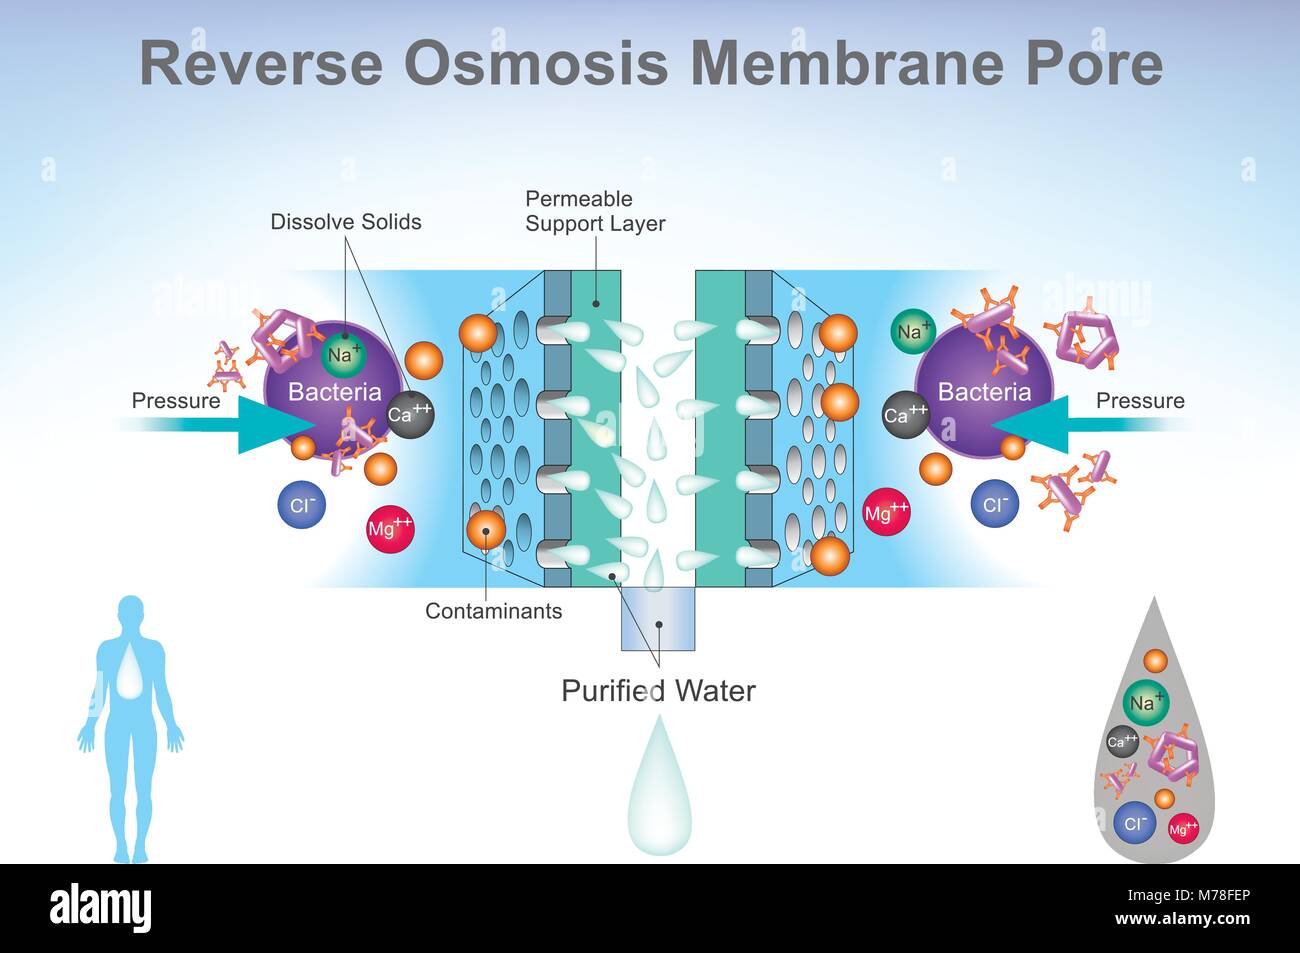 Reverse osmosis (RO) is a water purification technology that uses a semipermeable membrane to remove ions, molecules, and larger particles from drinki Stock Vector